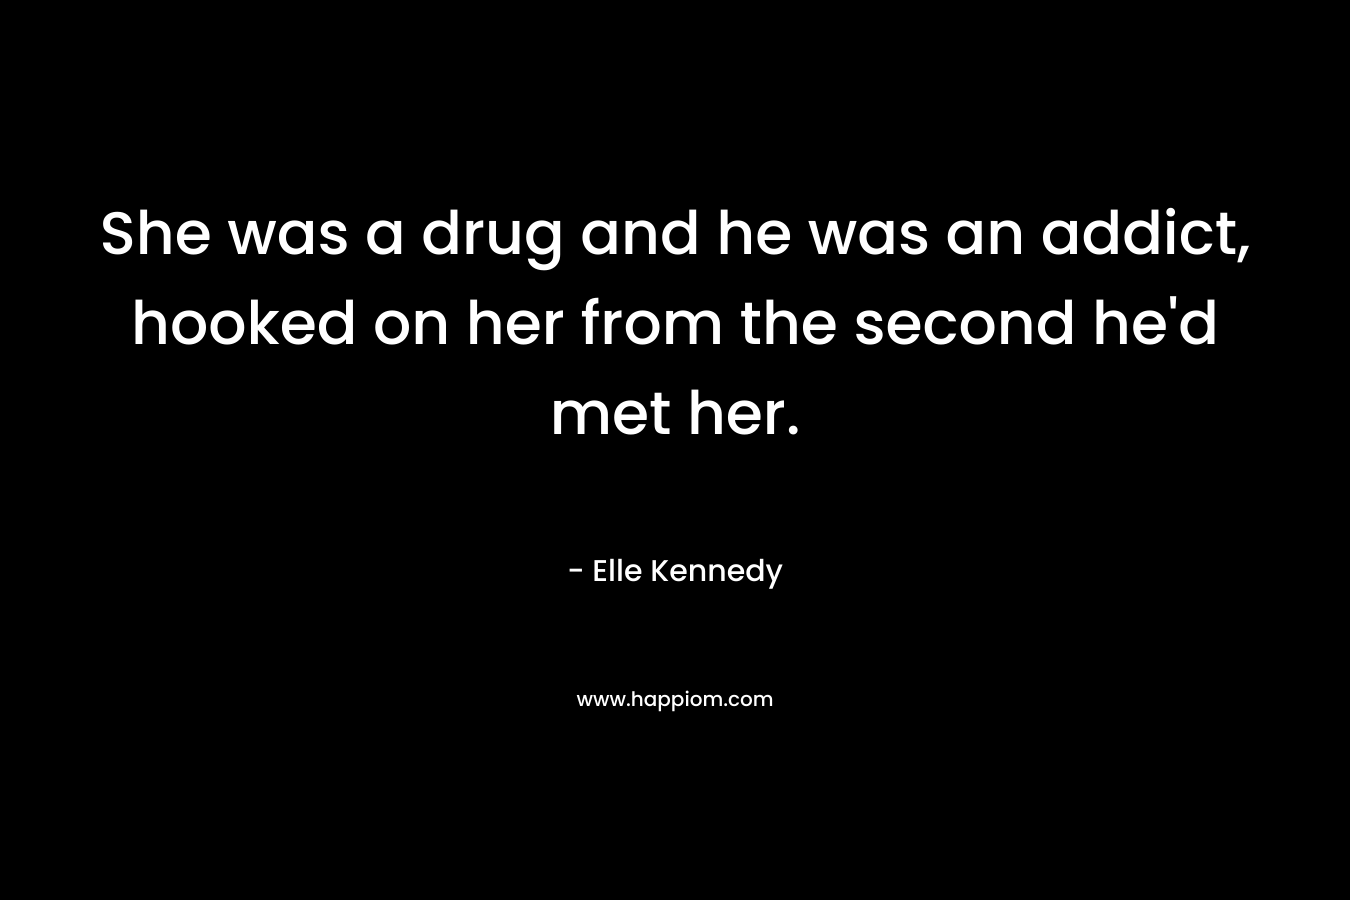 She was a drug and he was an addict, hooked on her from the second he’d met her. – Elle Kennedy